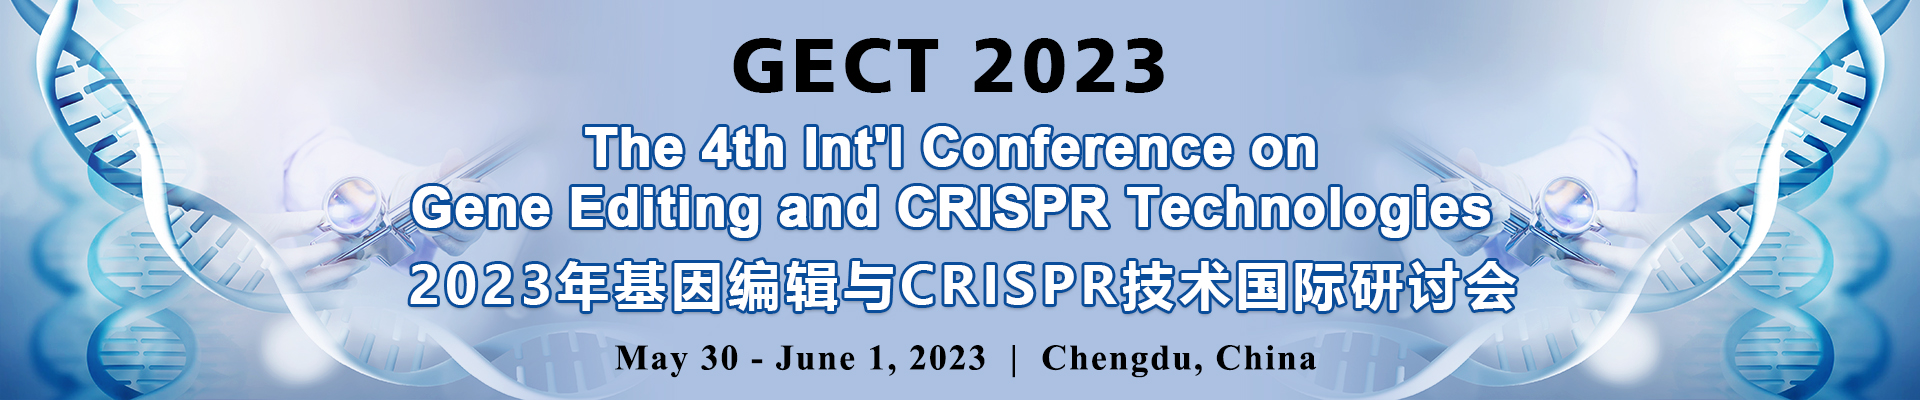 The 4th Int'l Conference on Gene Editing and CRISPR Technologies (GECT 2023)